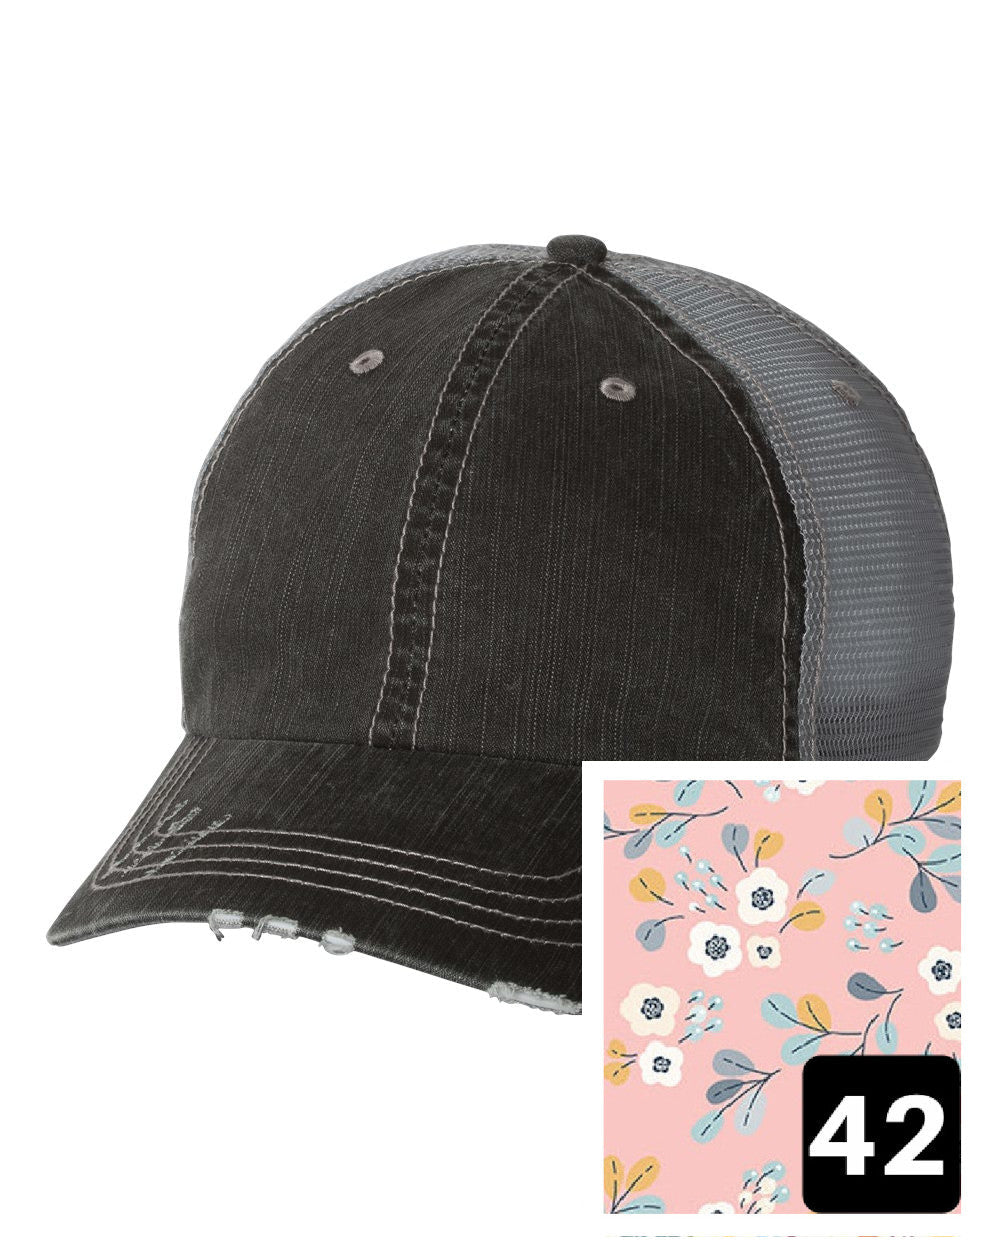 gray distressed trucker hat with light blue and pink mosaic fabric state of Illinois